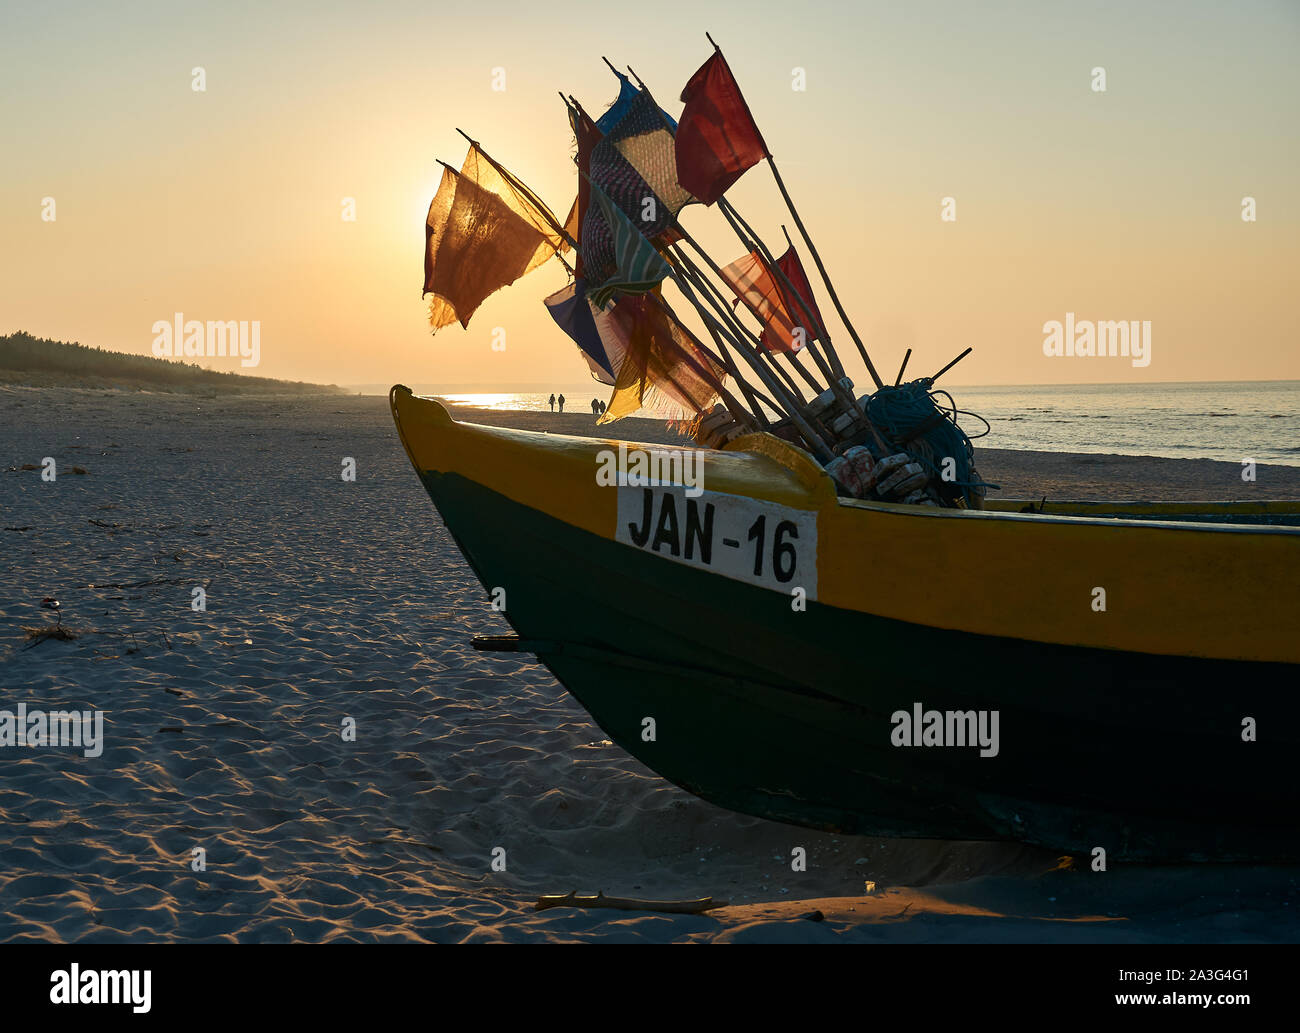 Traditional Polish fishing boat (Kuter) during a sunset on a beach near the town of Jantar, Poland. Stock Photo